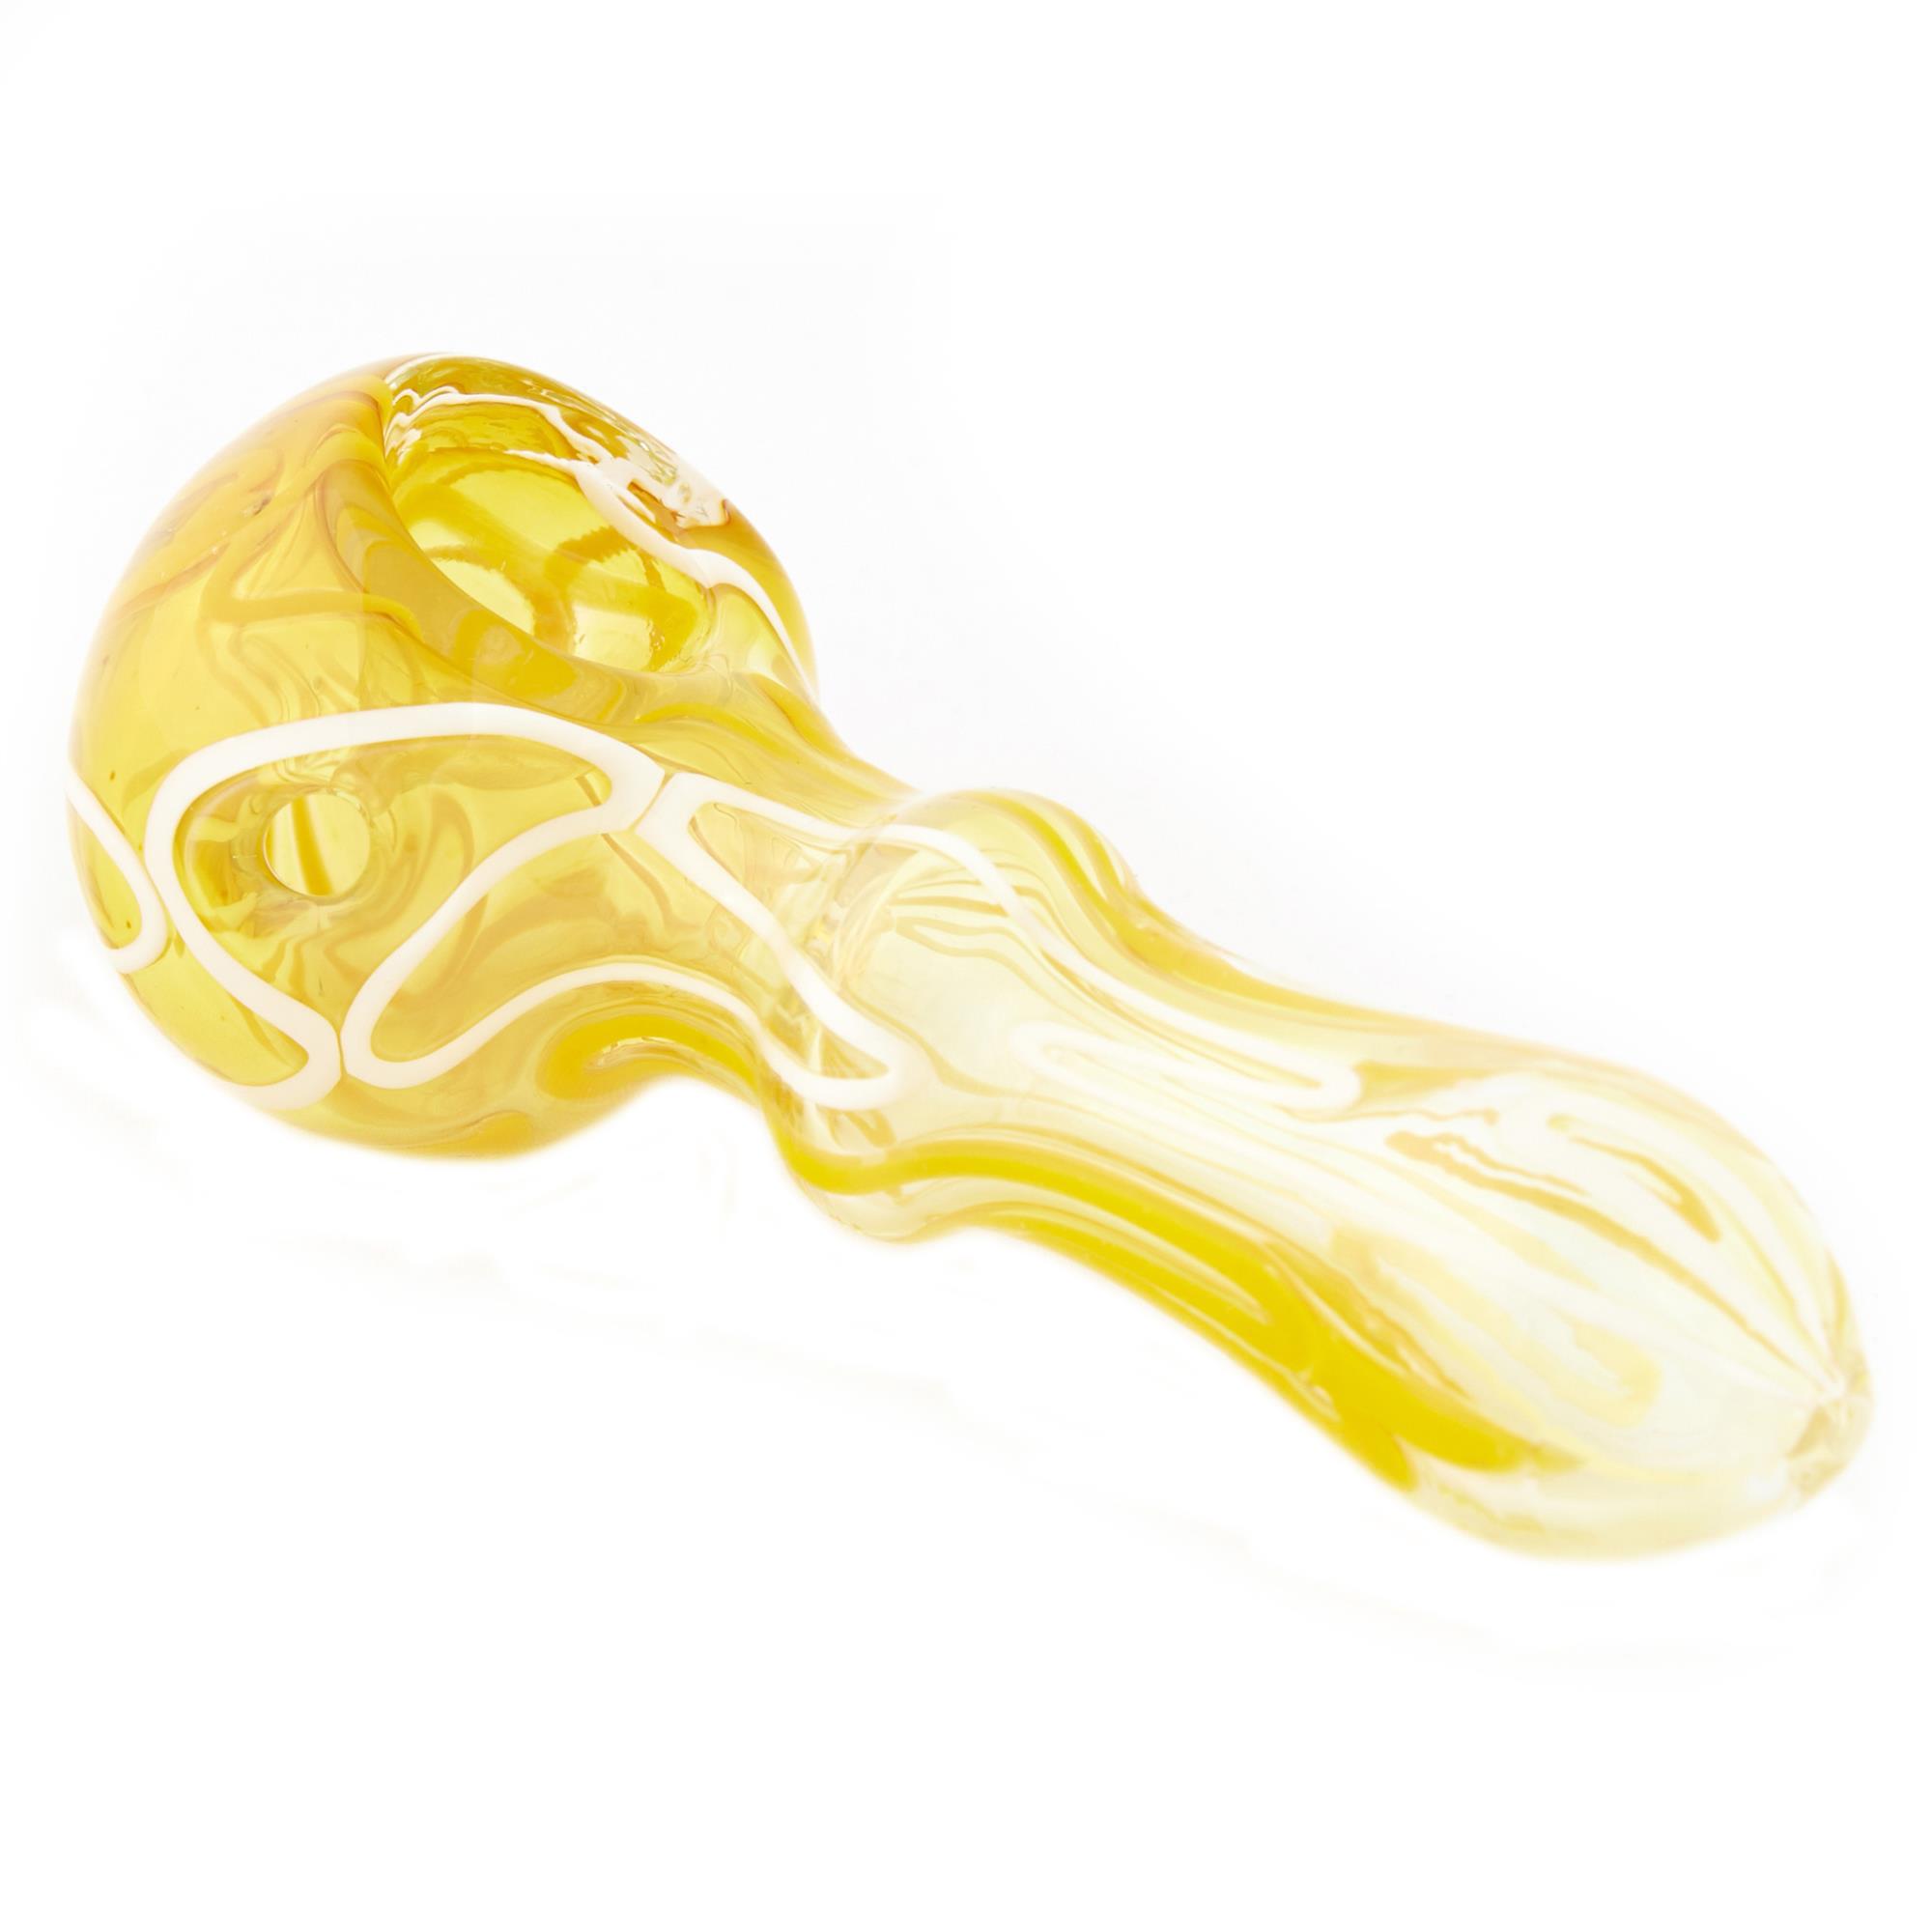 FIRE UP SPOON PIPE